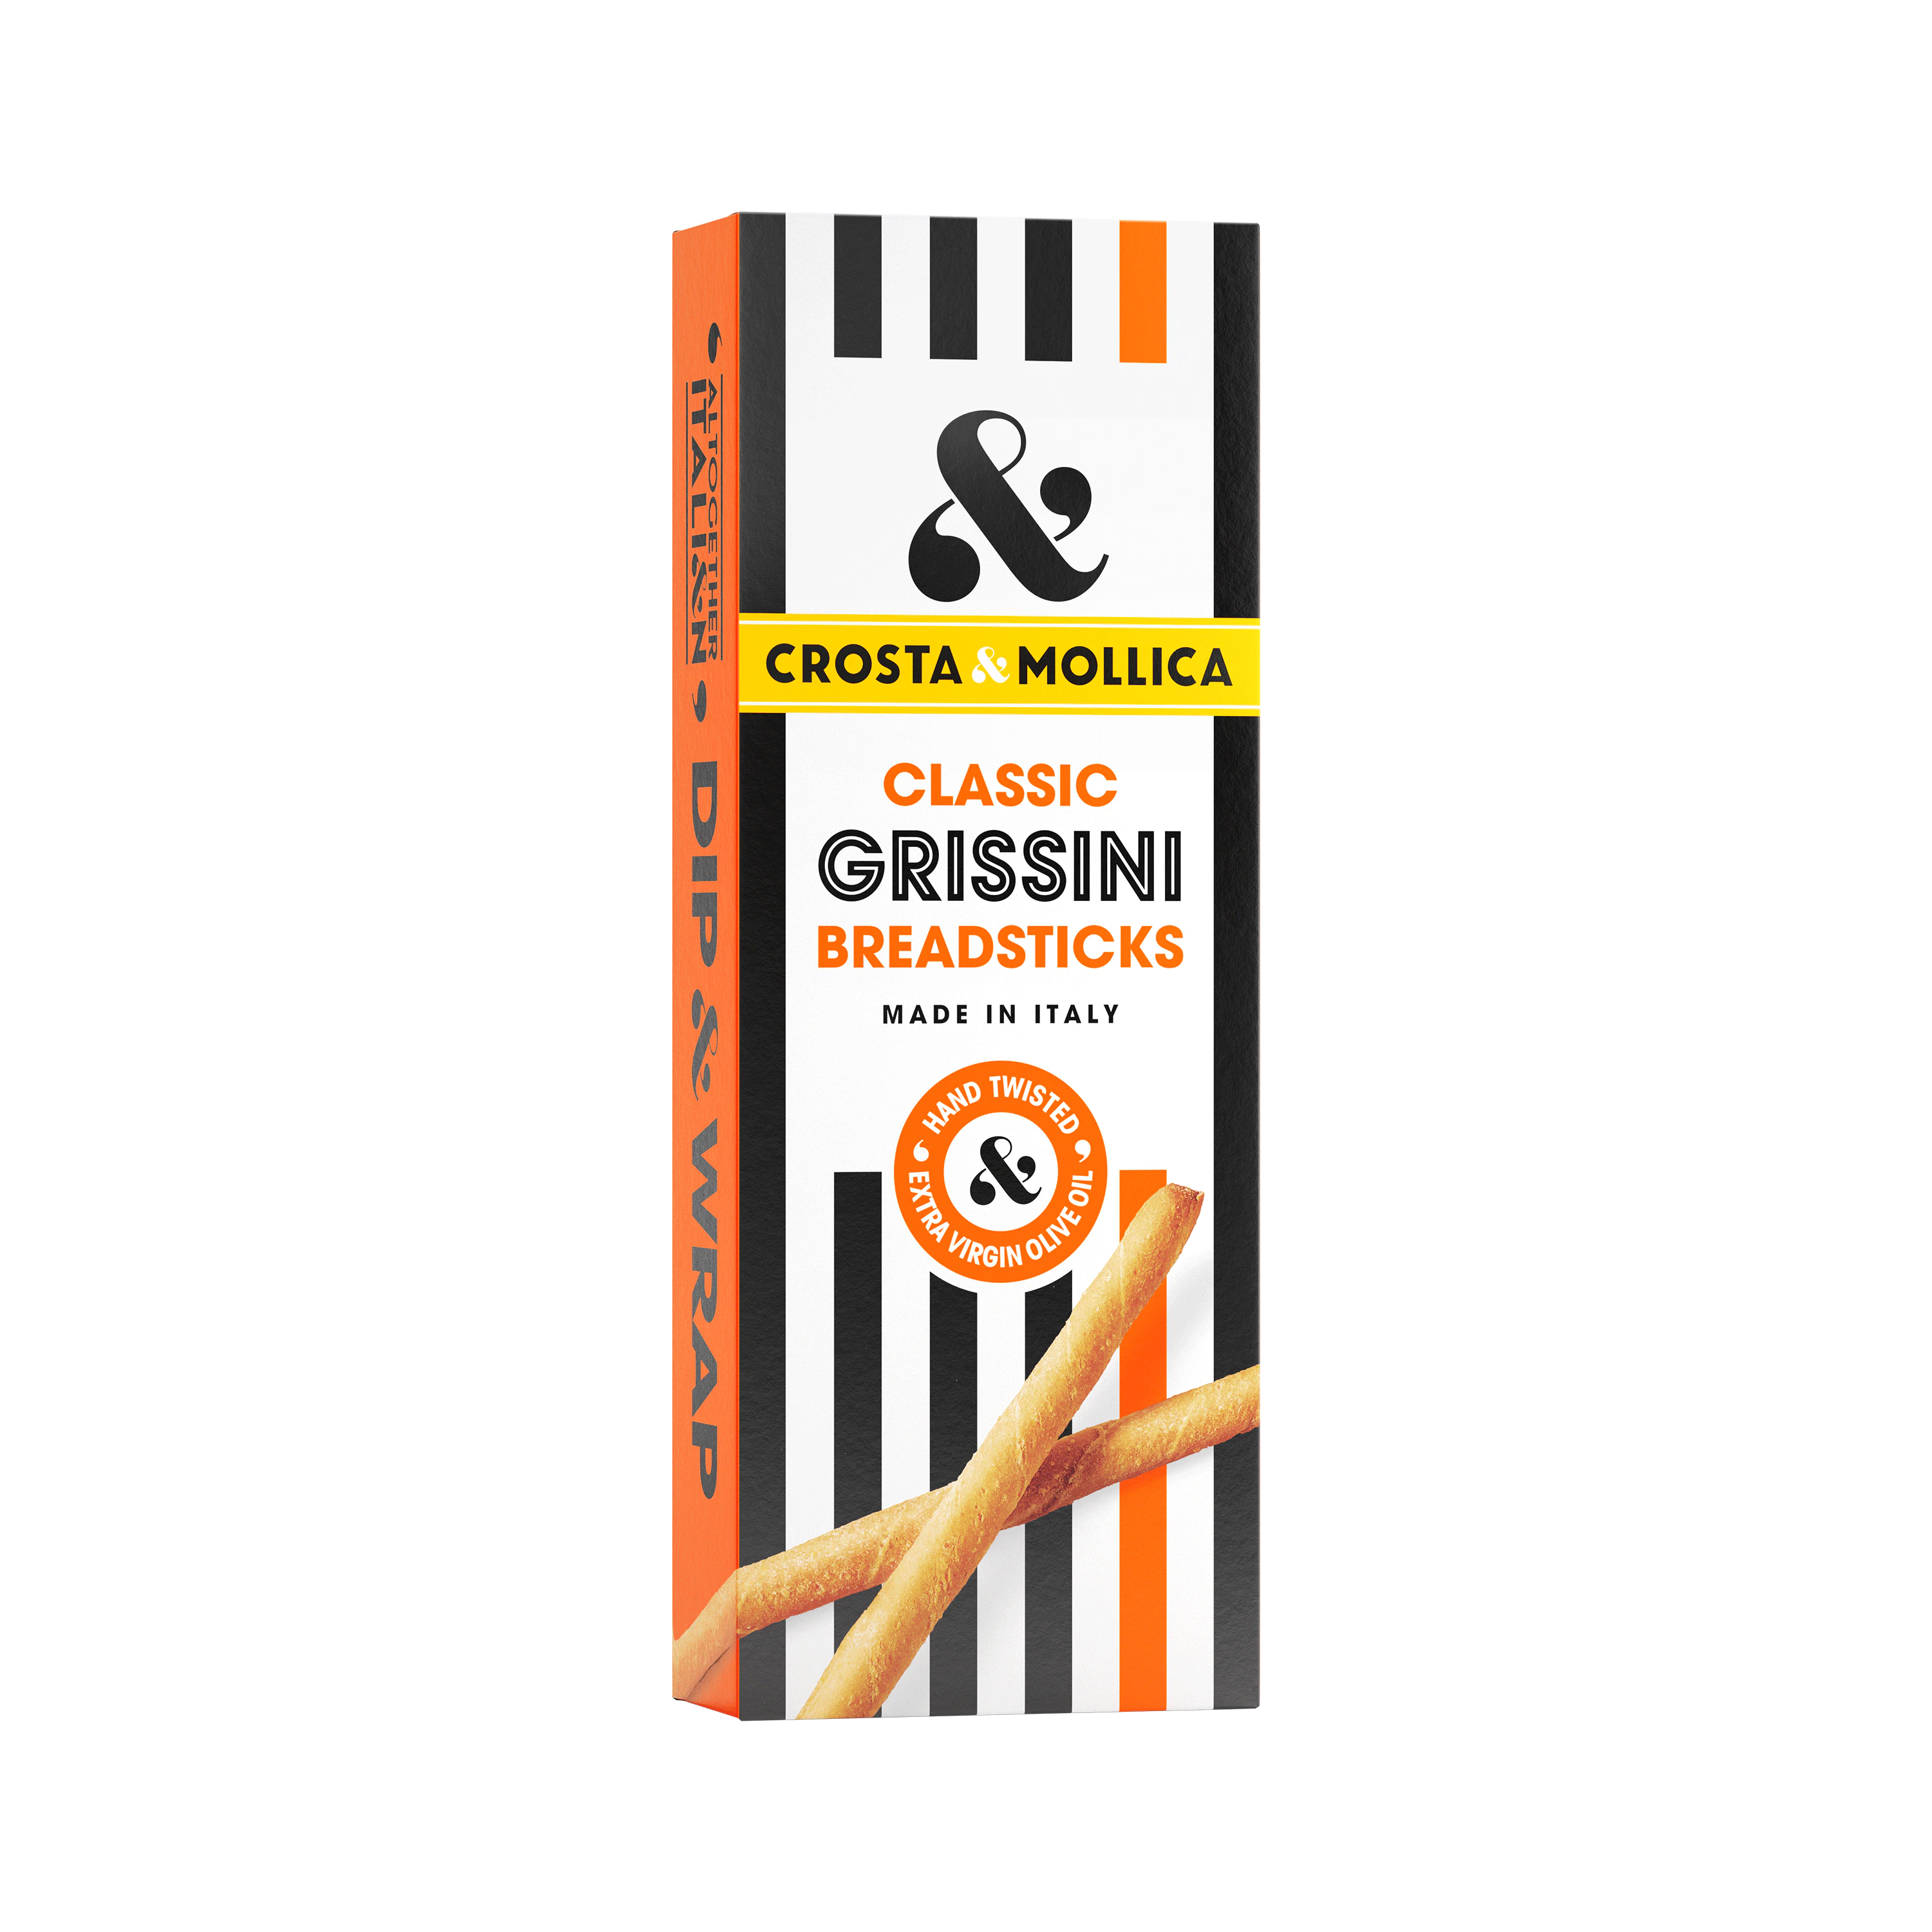 Classic Grissini packaging.